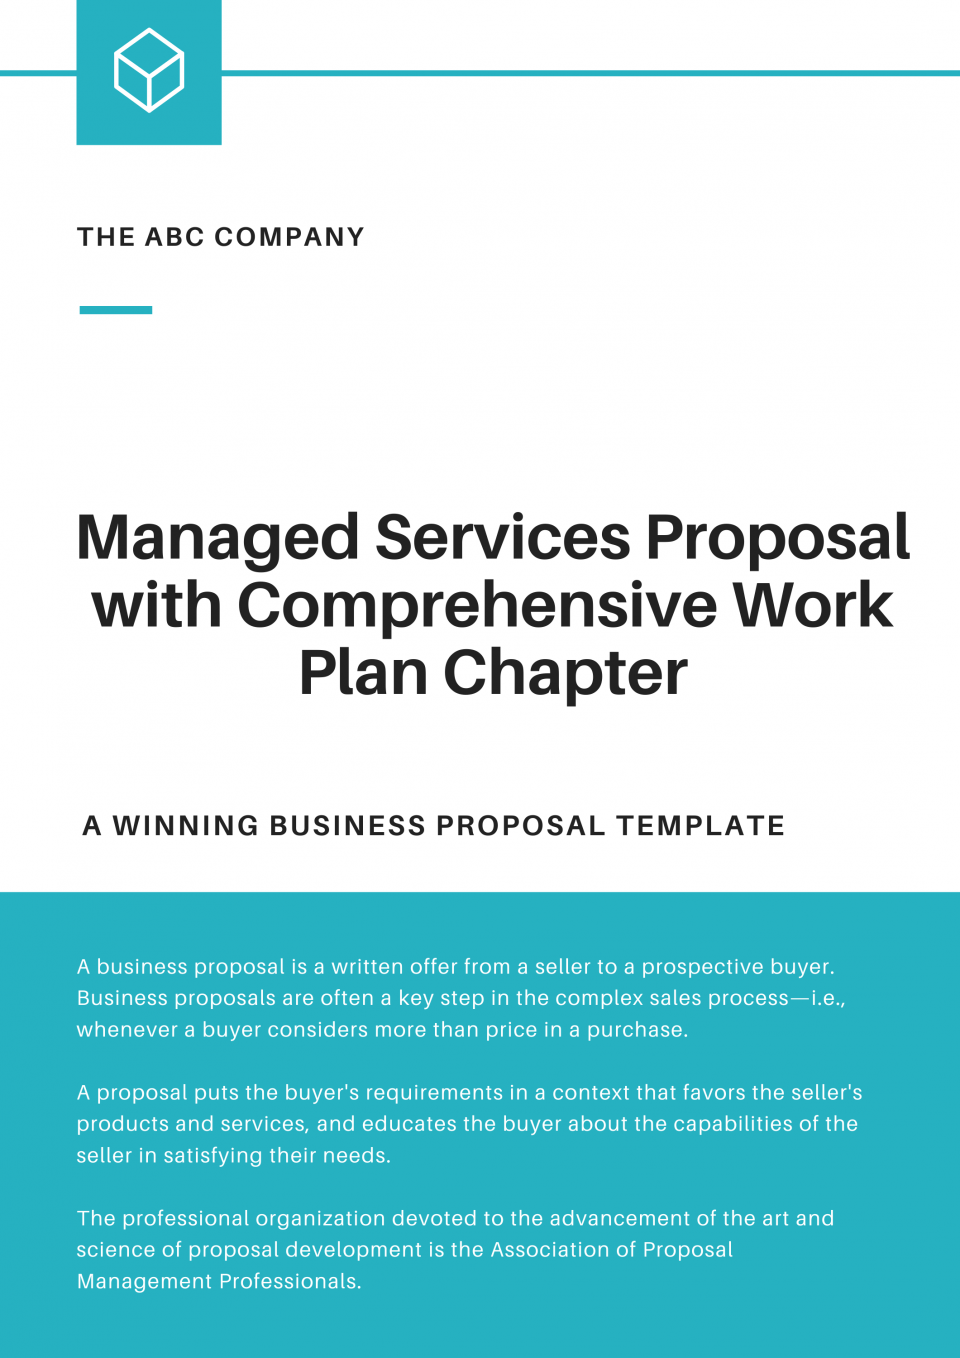 Managed Services Proposal Template with comprehensive work plan chapter